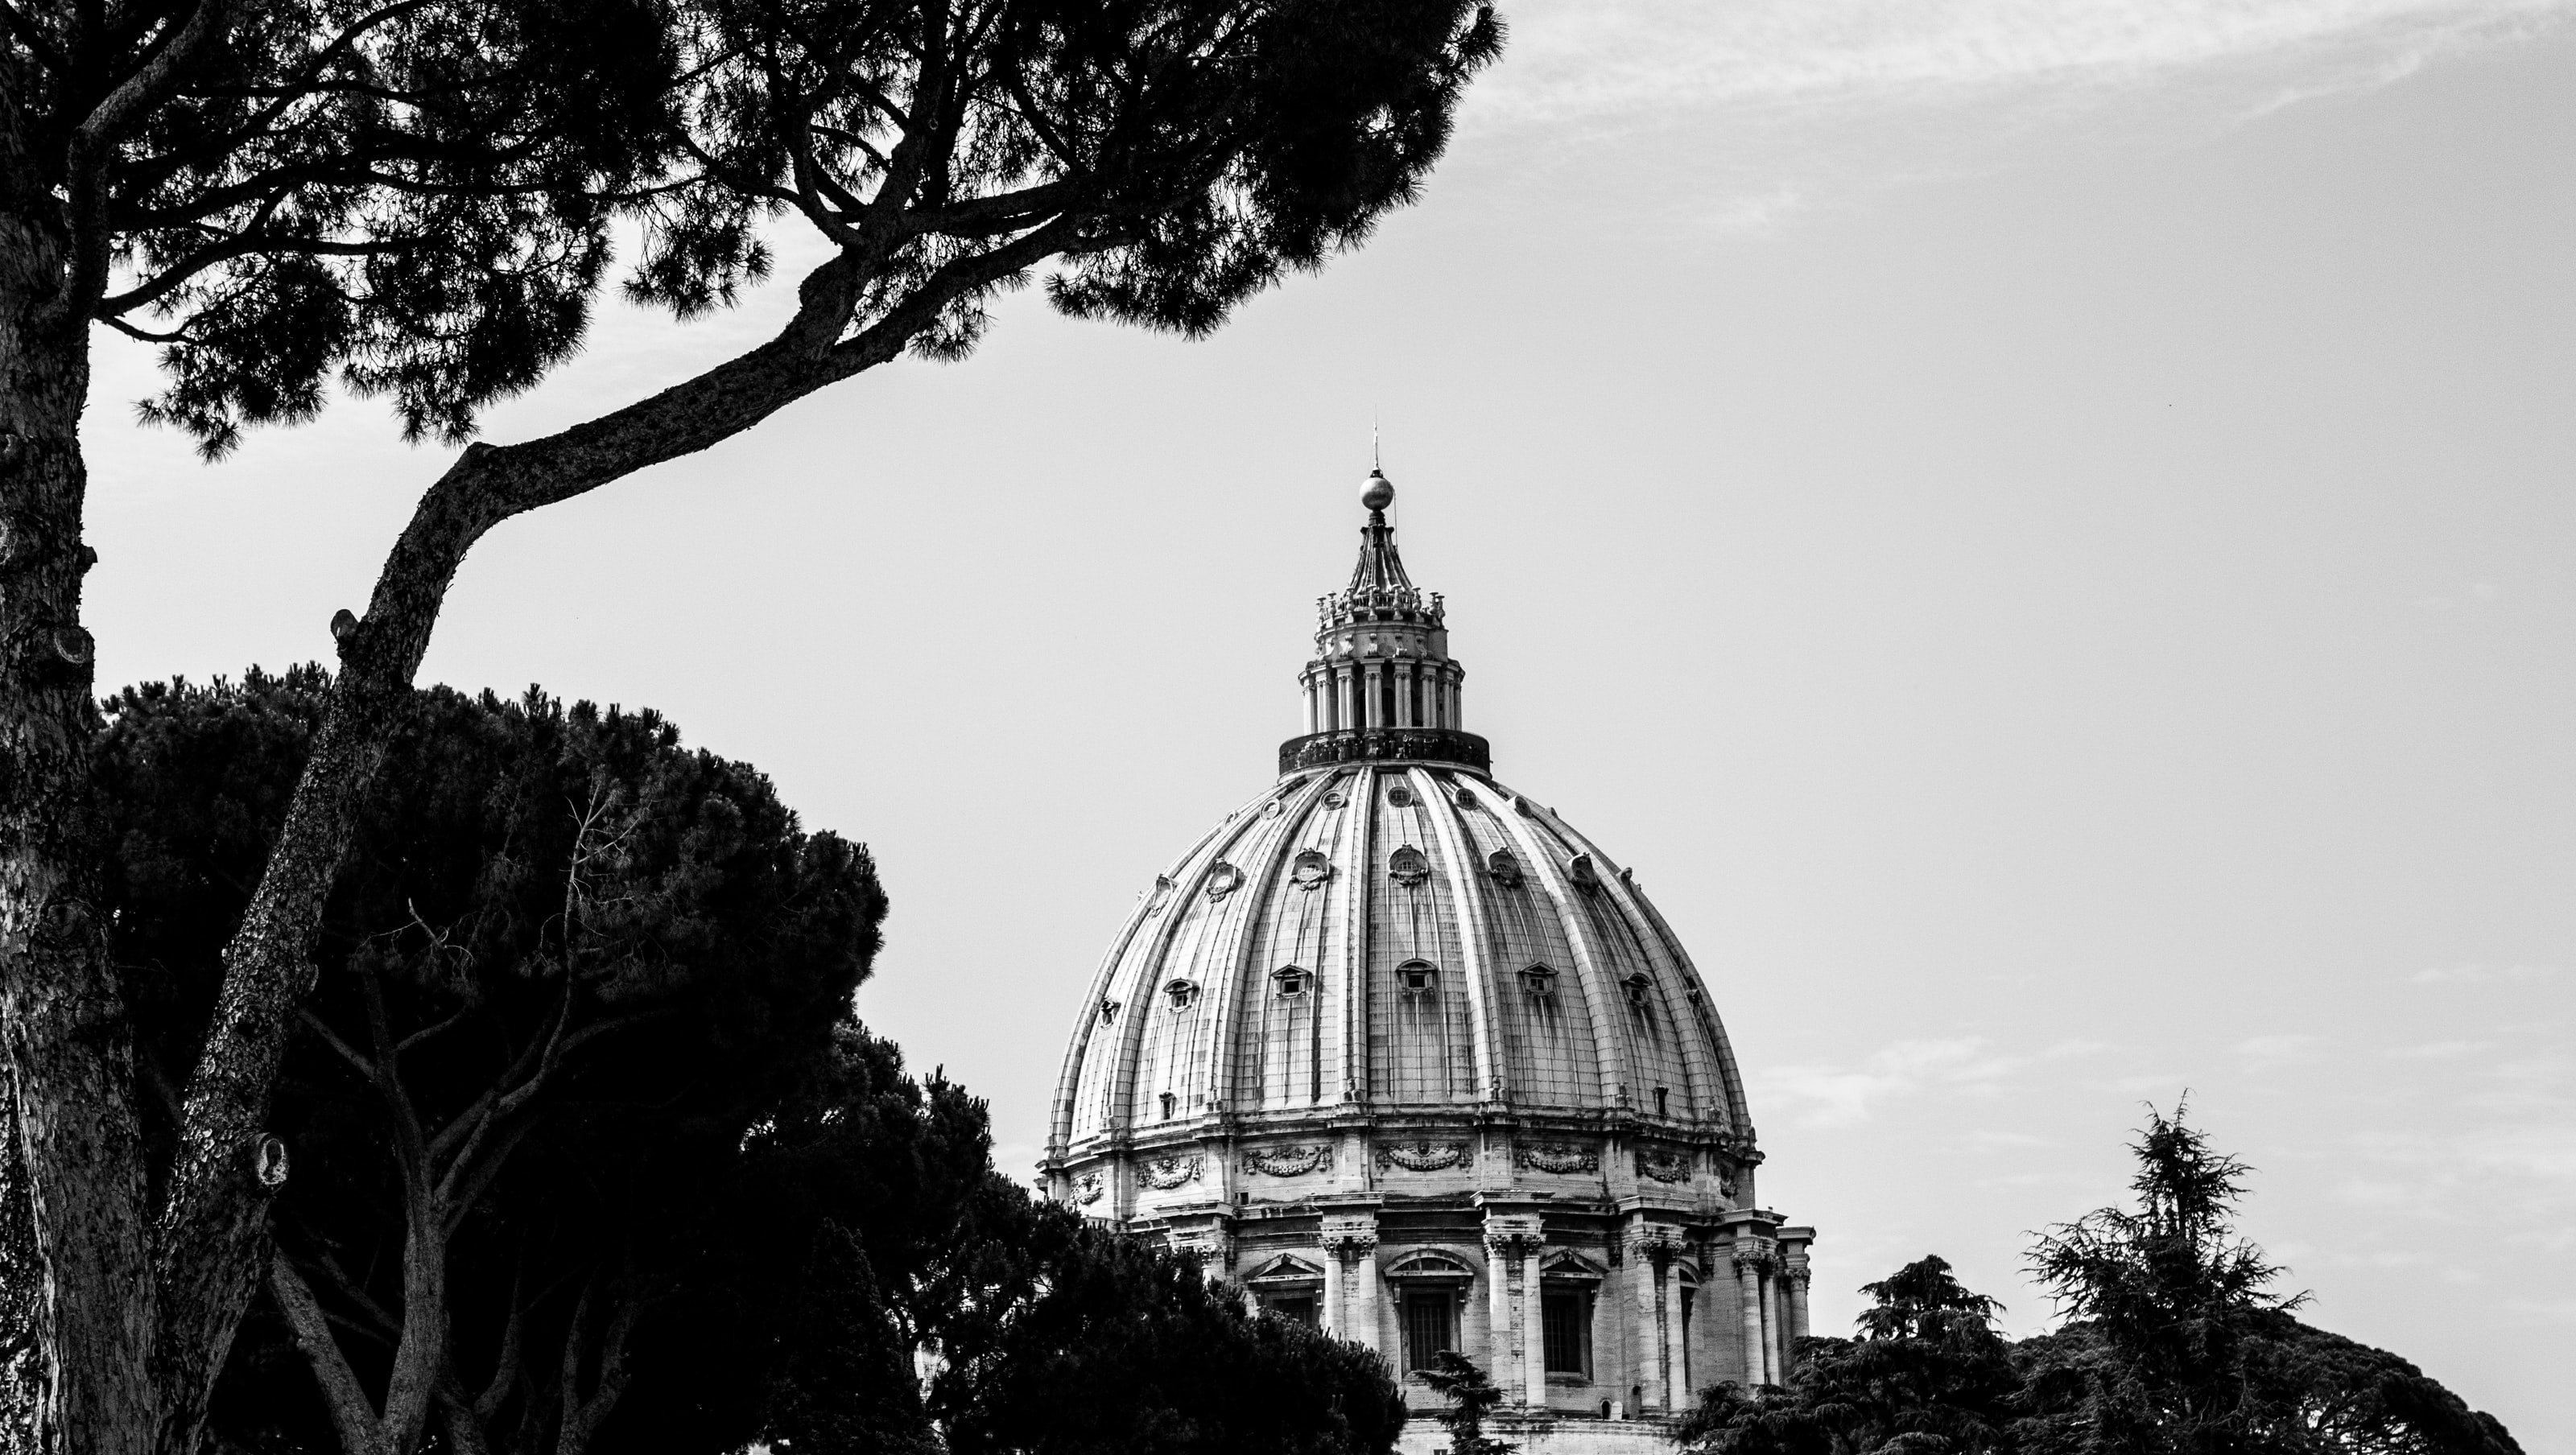 Black and white image of St. Peter's Basilica, Rome, viewed from a distance with trees in the foreground